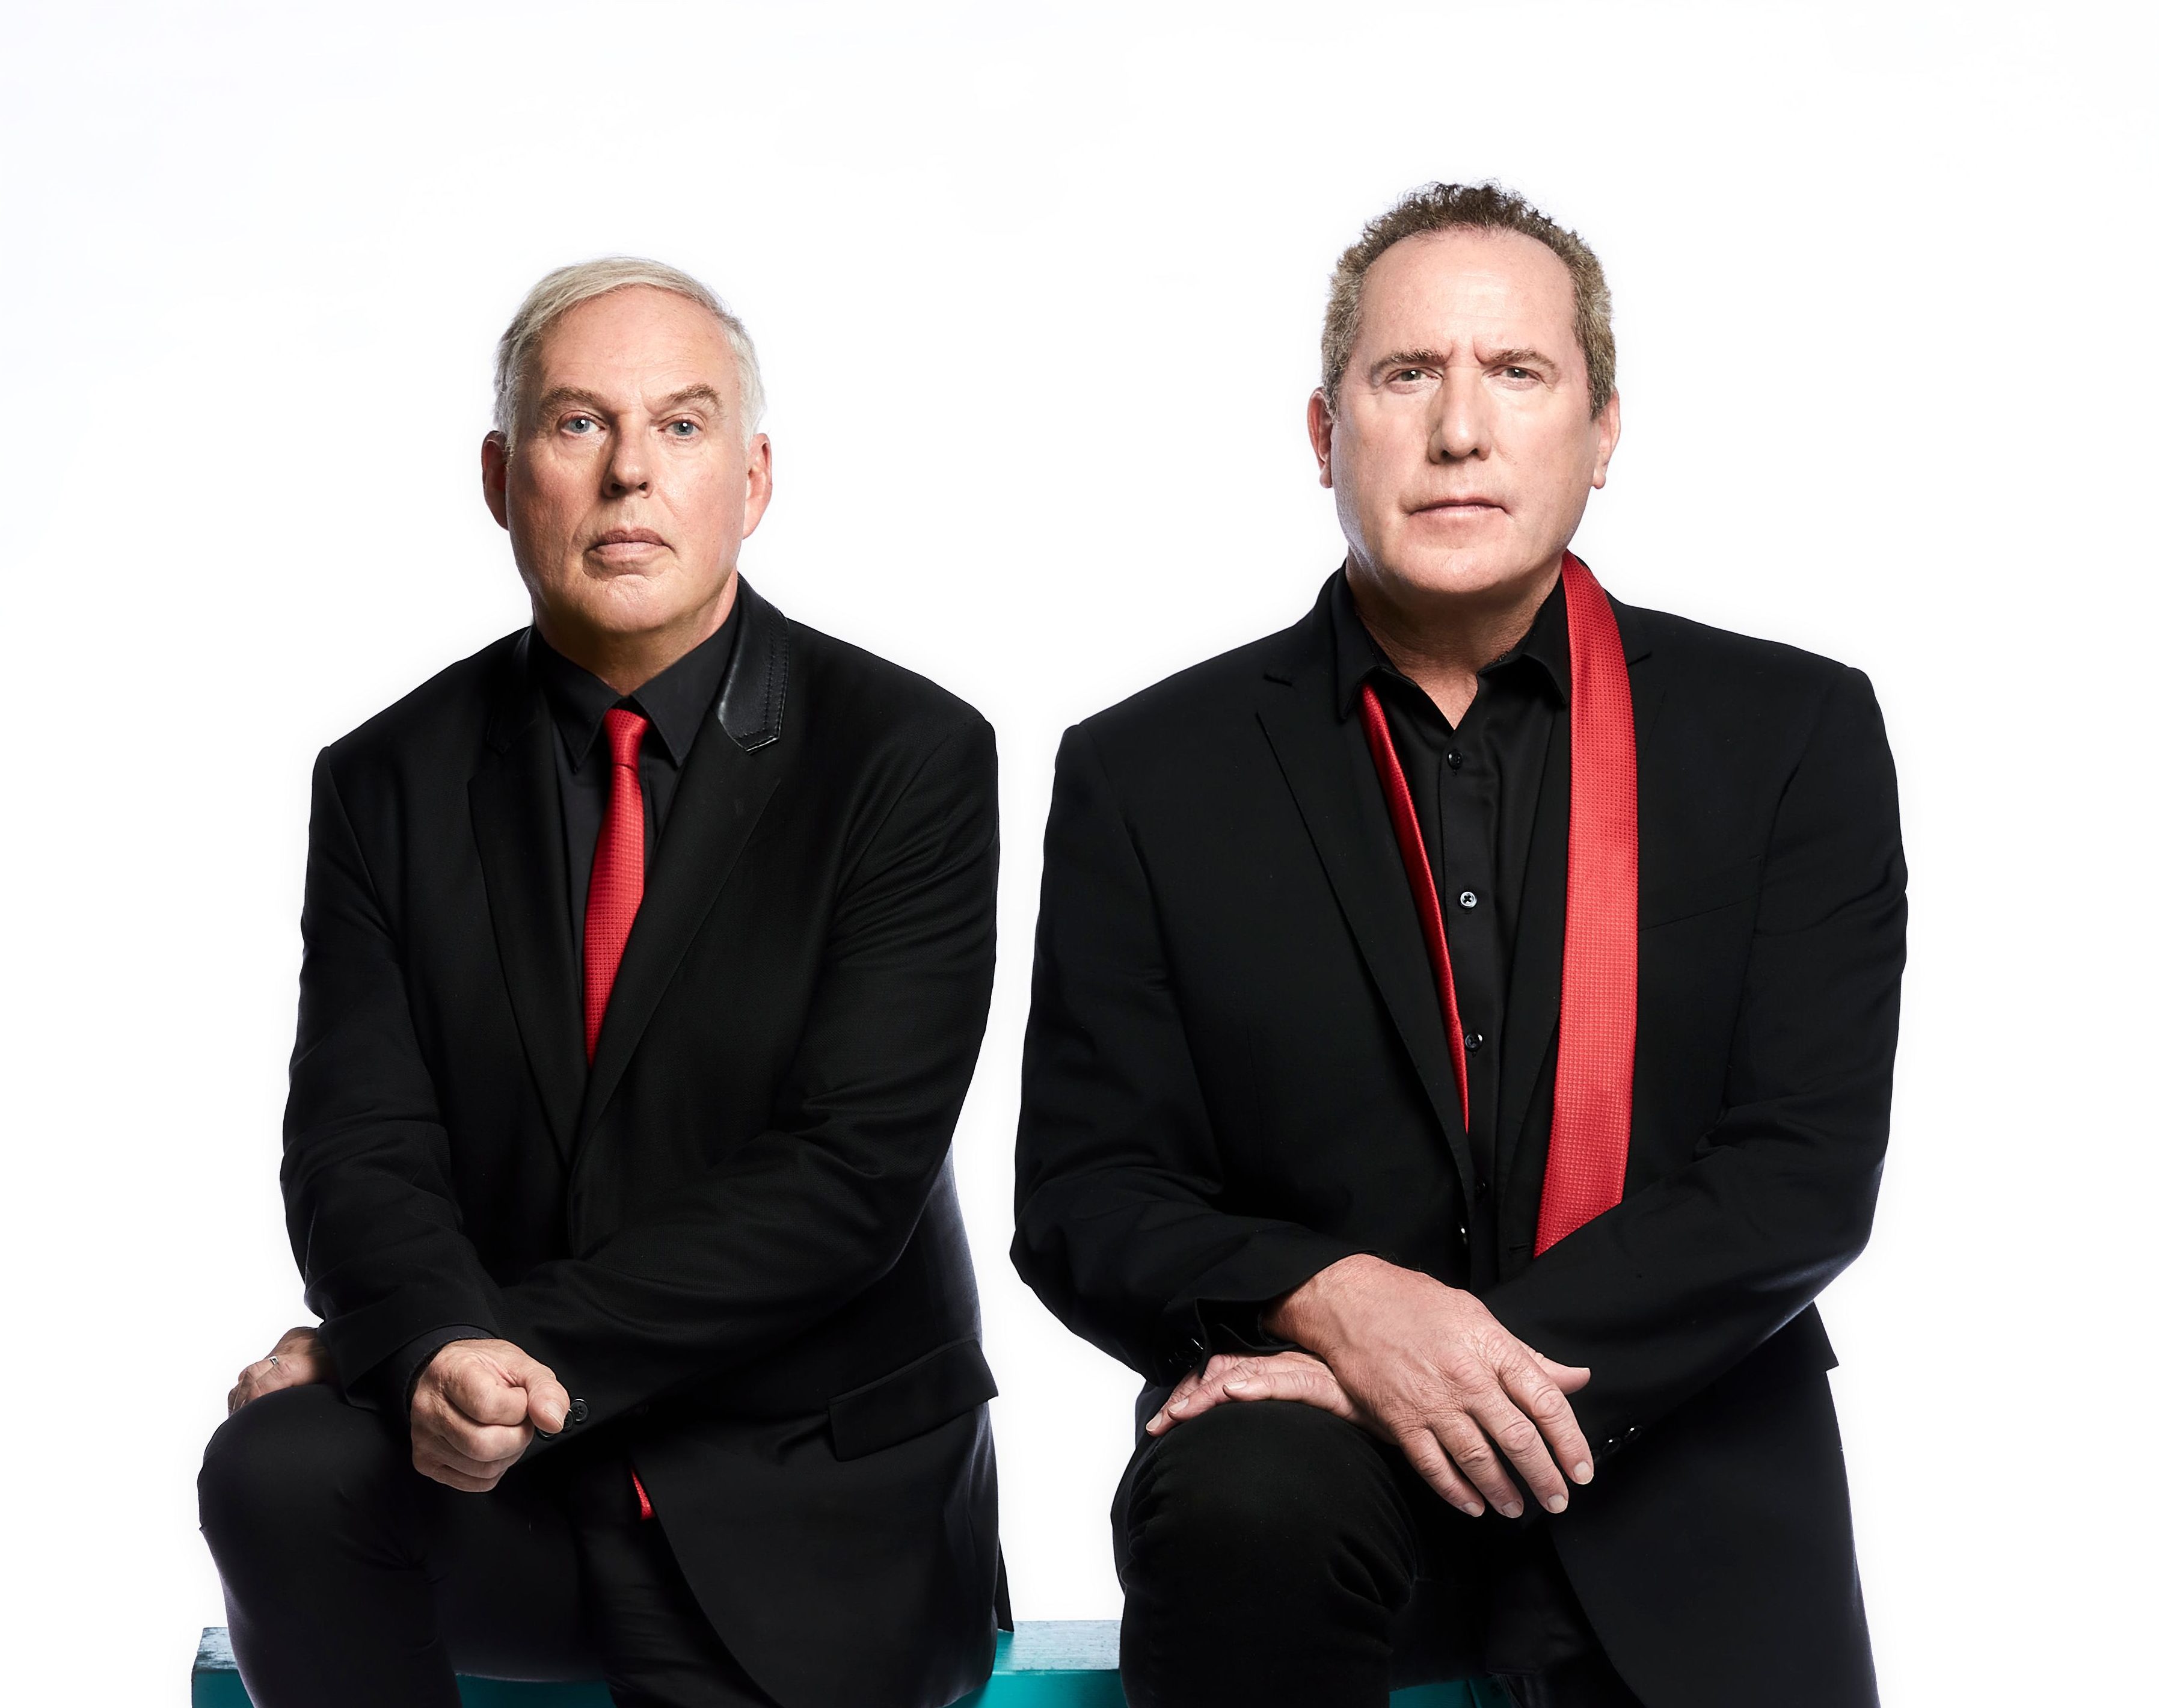 OMD’s ‘Bauhaus Staircase’ Is Their Most Explicitly Political Record